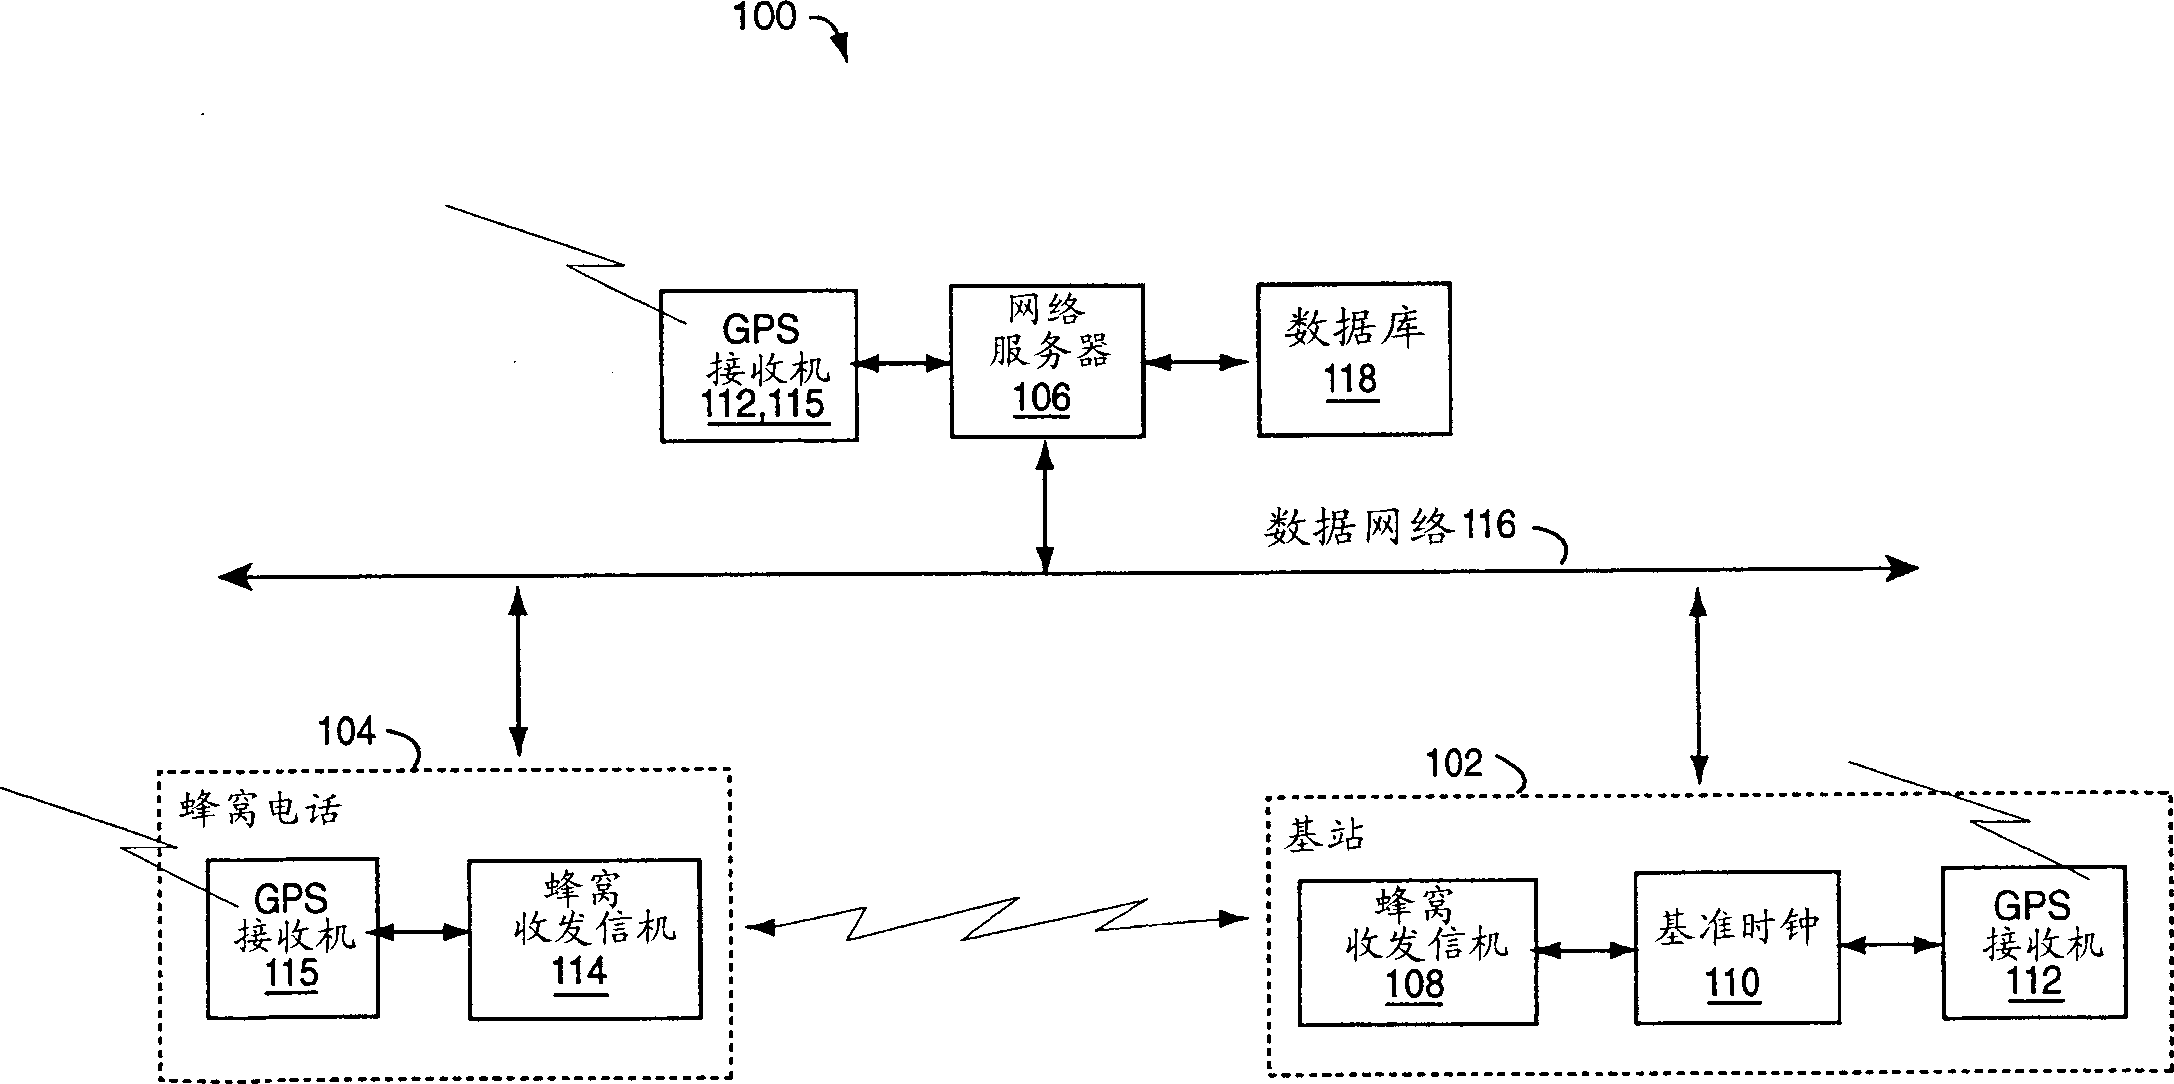 Receiver for assisting satellite in navigation with foundation facilities, and method therefor